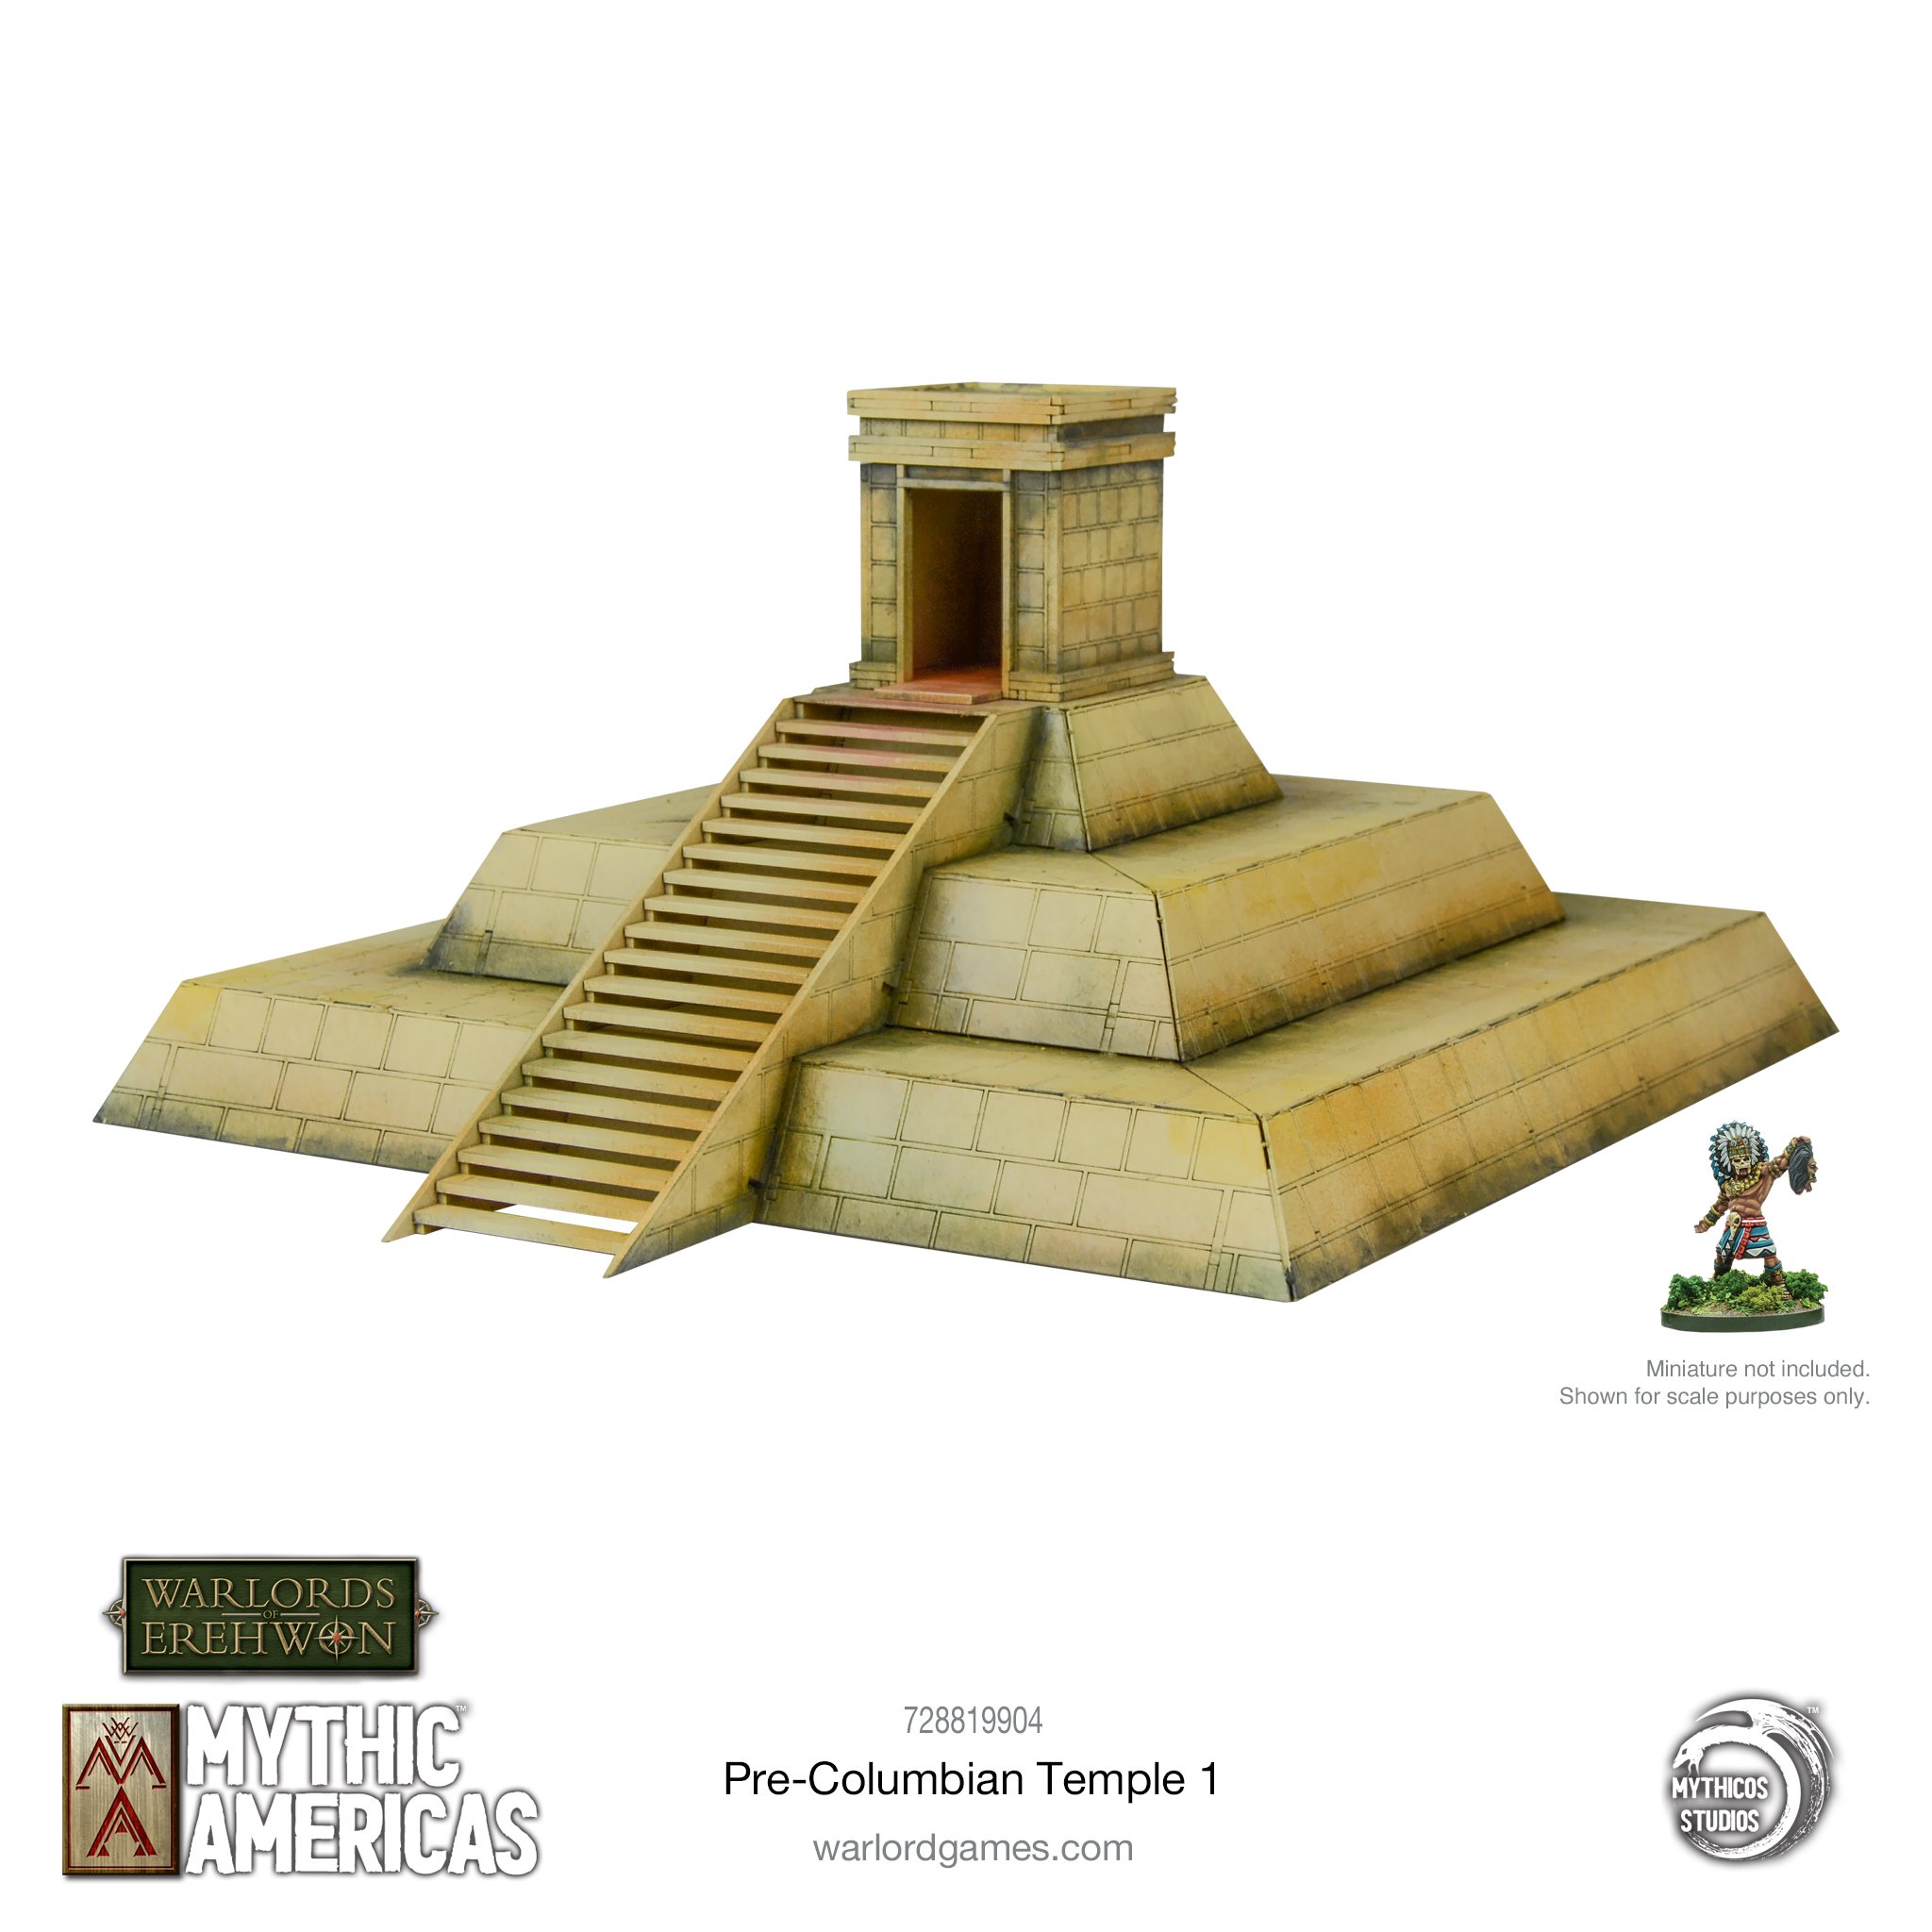 Warlords of Erehwon: Mythic Americas- Pre-Columbian Temple 